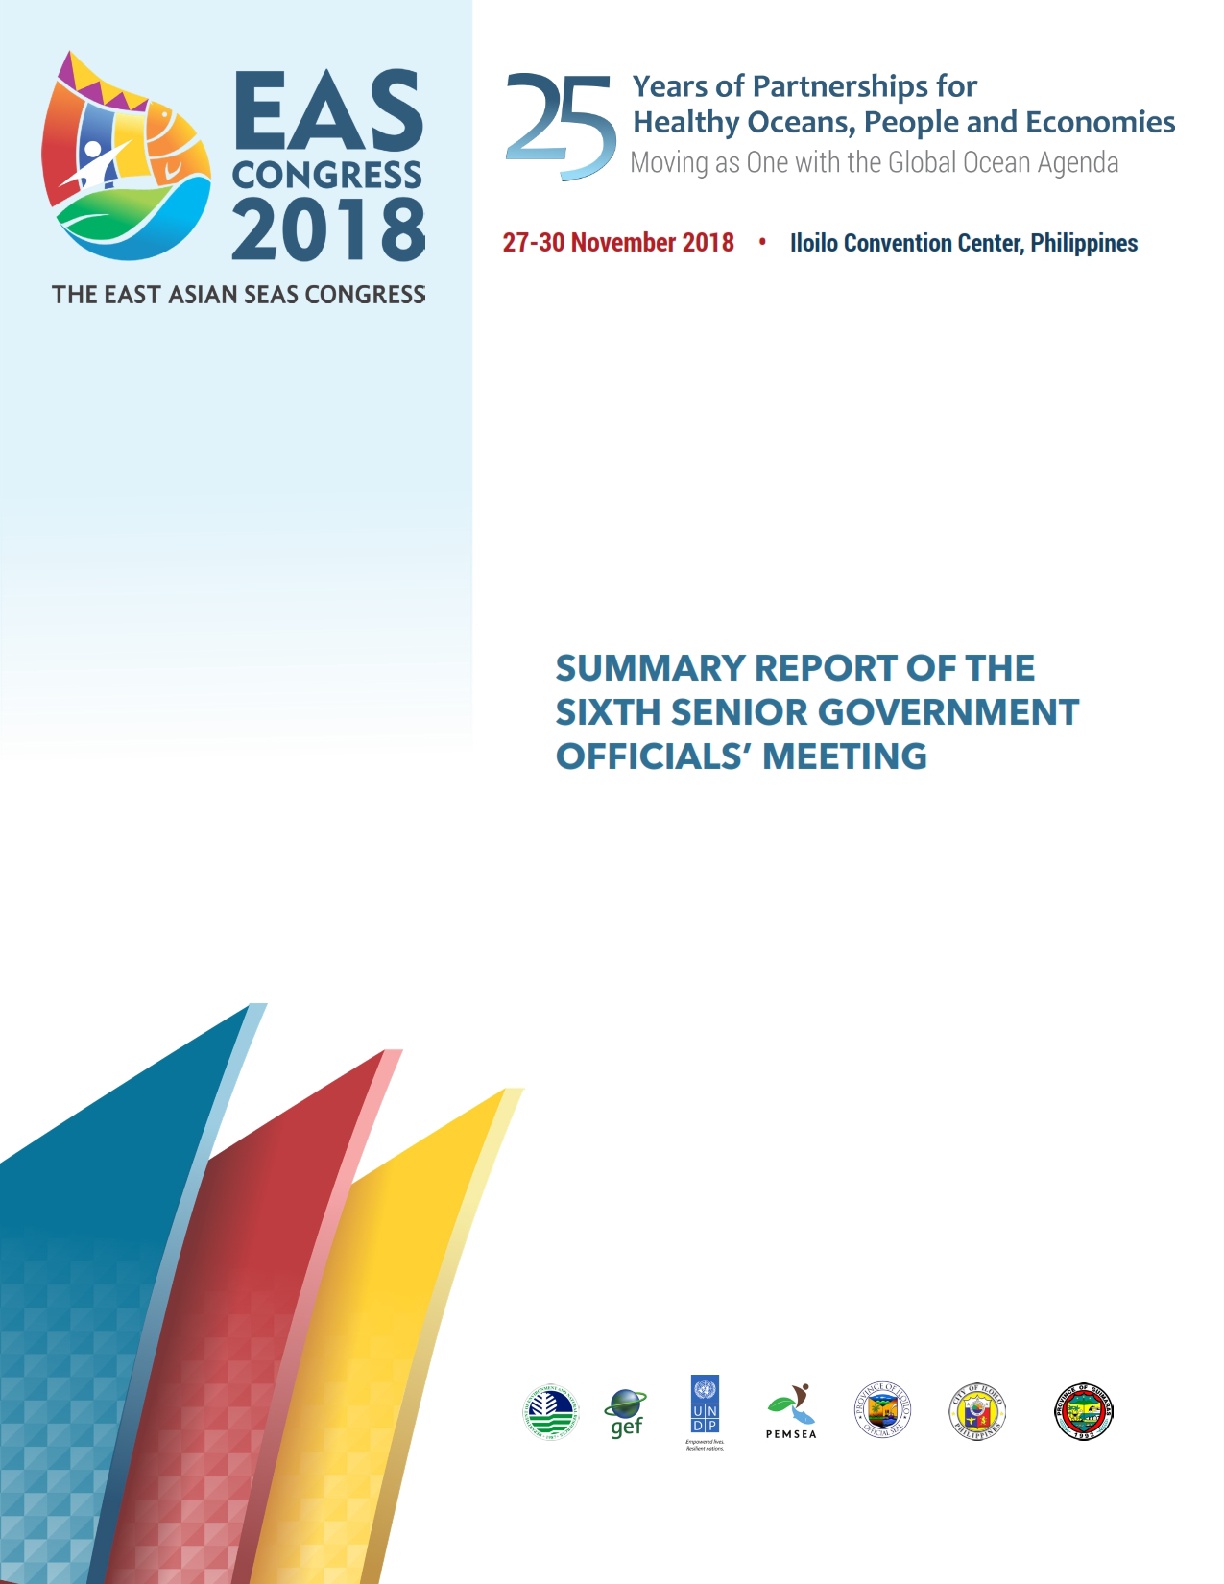 EASC 2018 Summary Report on Senior Government Officials’ Meeting